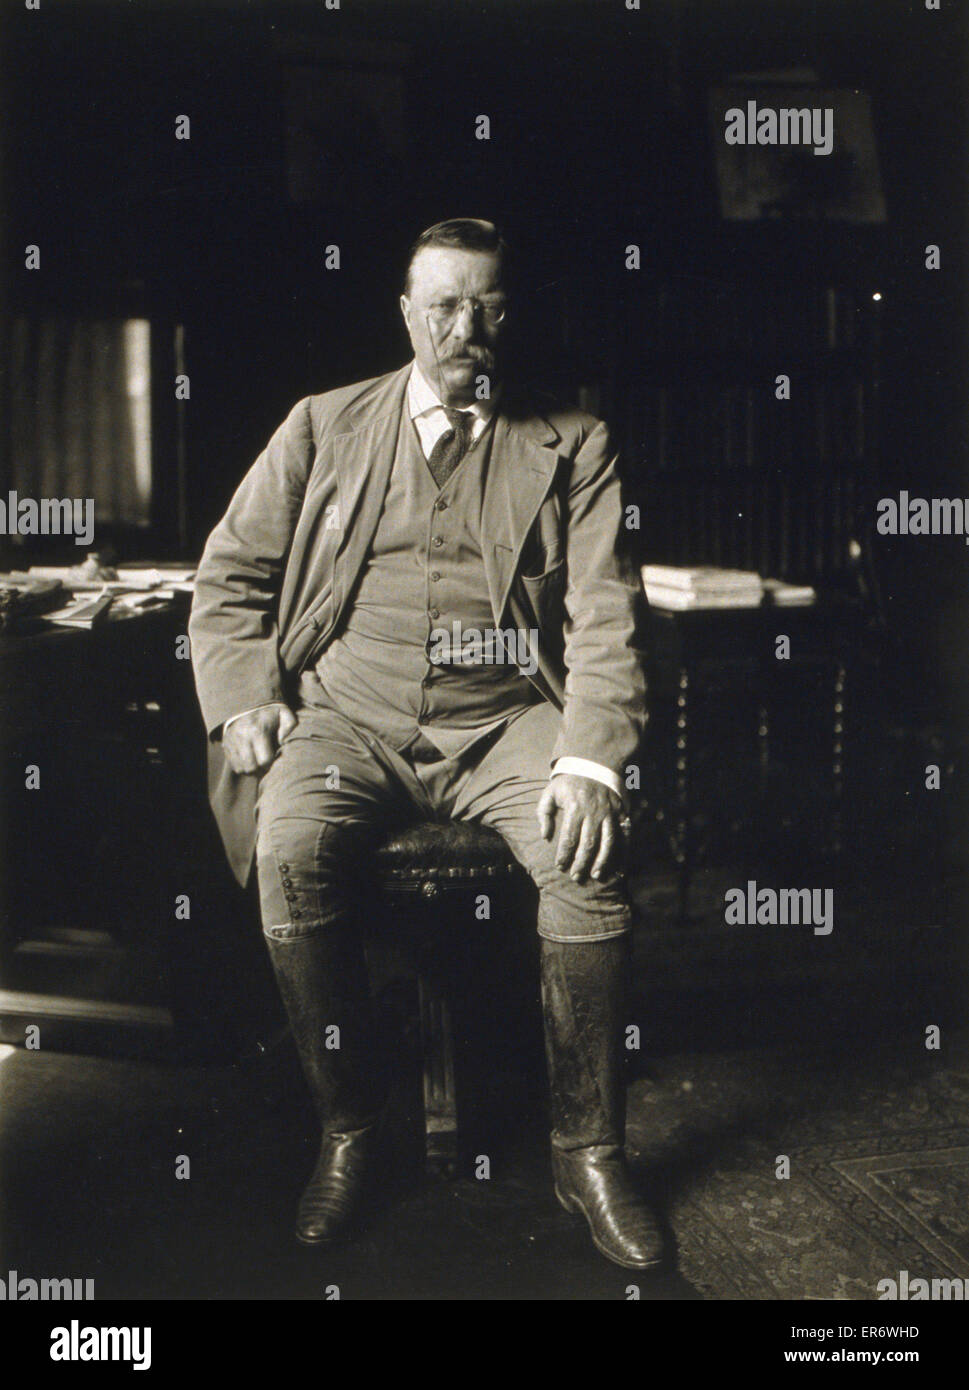 Theodore Roosevelt in his library at Oyster Bay N.Y. Theodore Roosevelt, full-length portrait, seated, facing for the front. c. 1912 Stock Photo